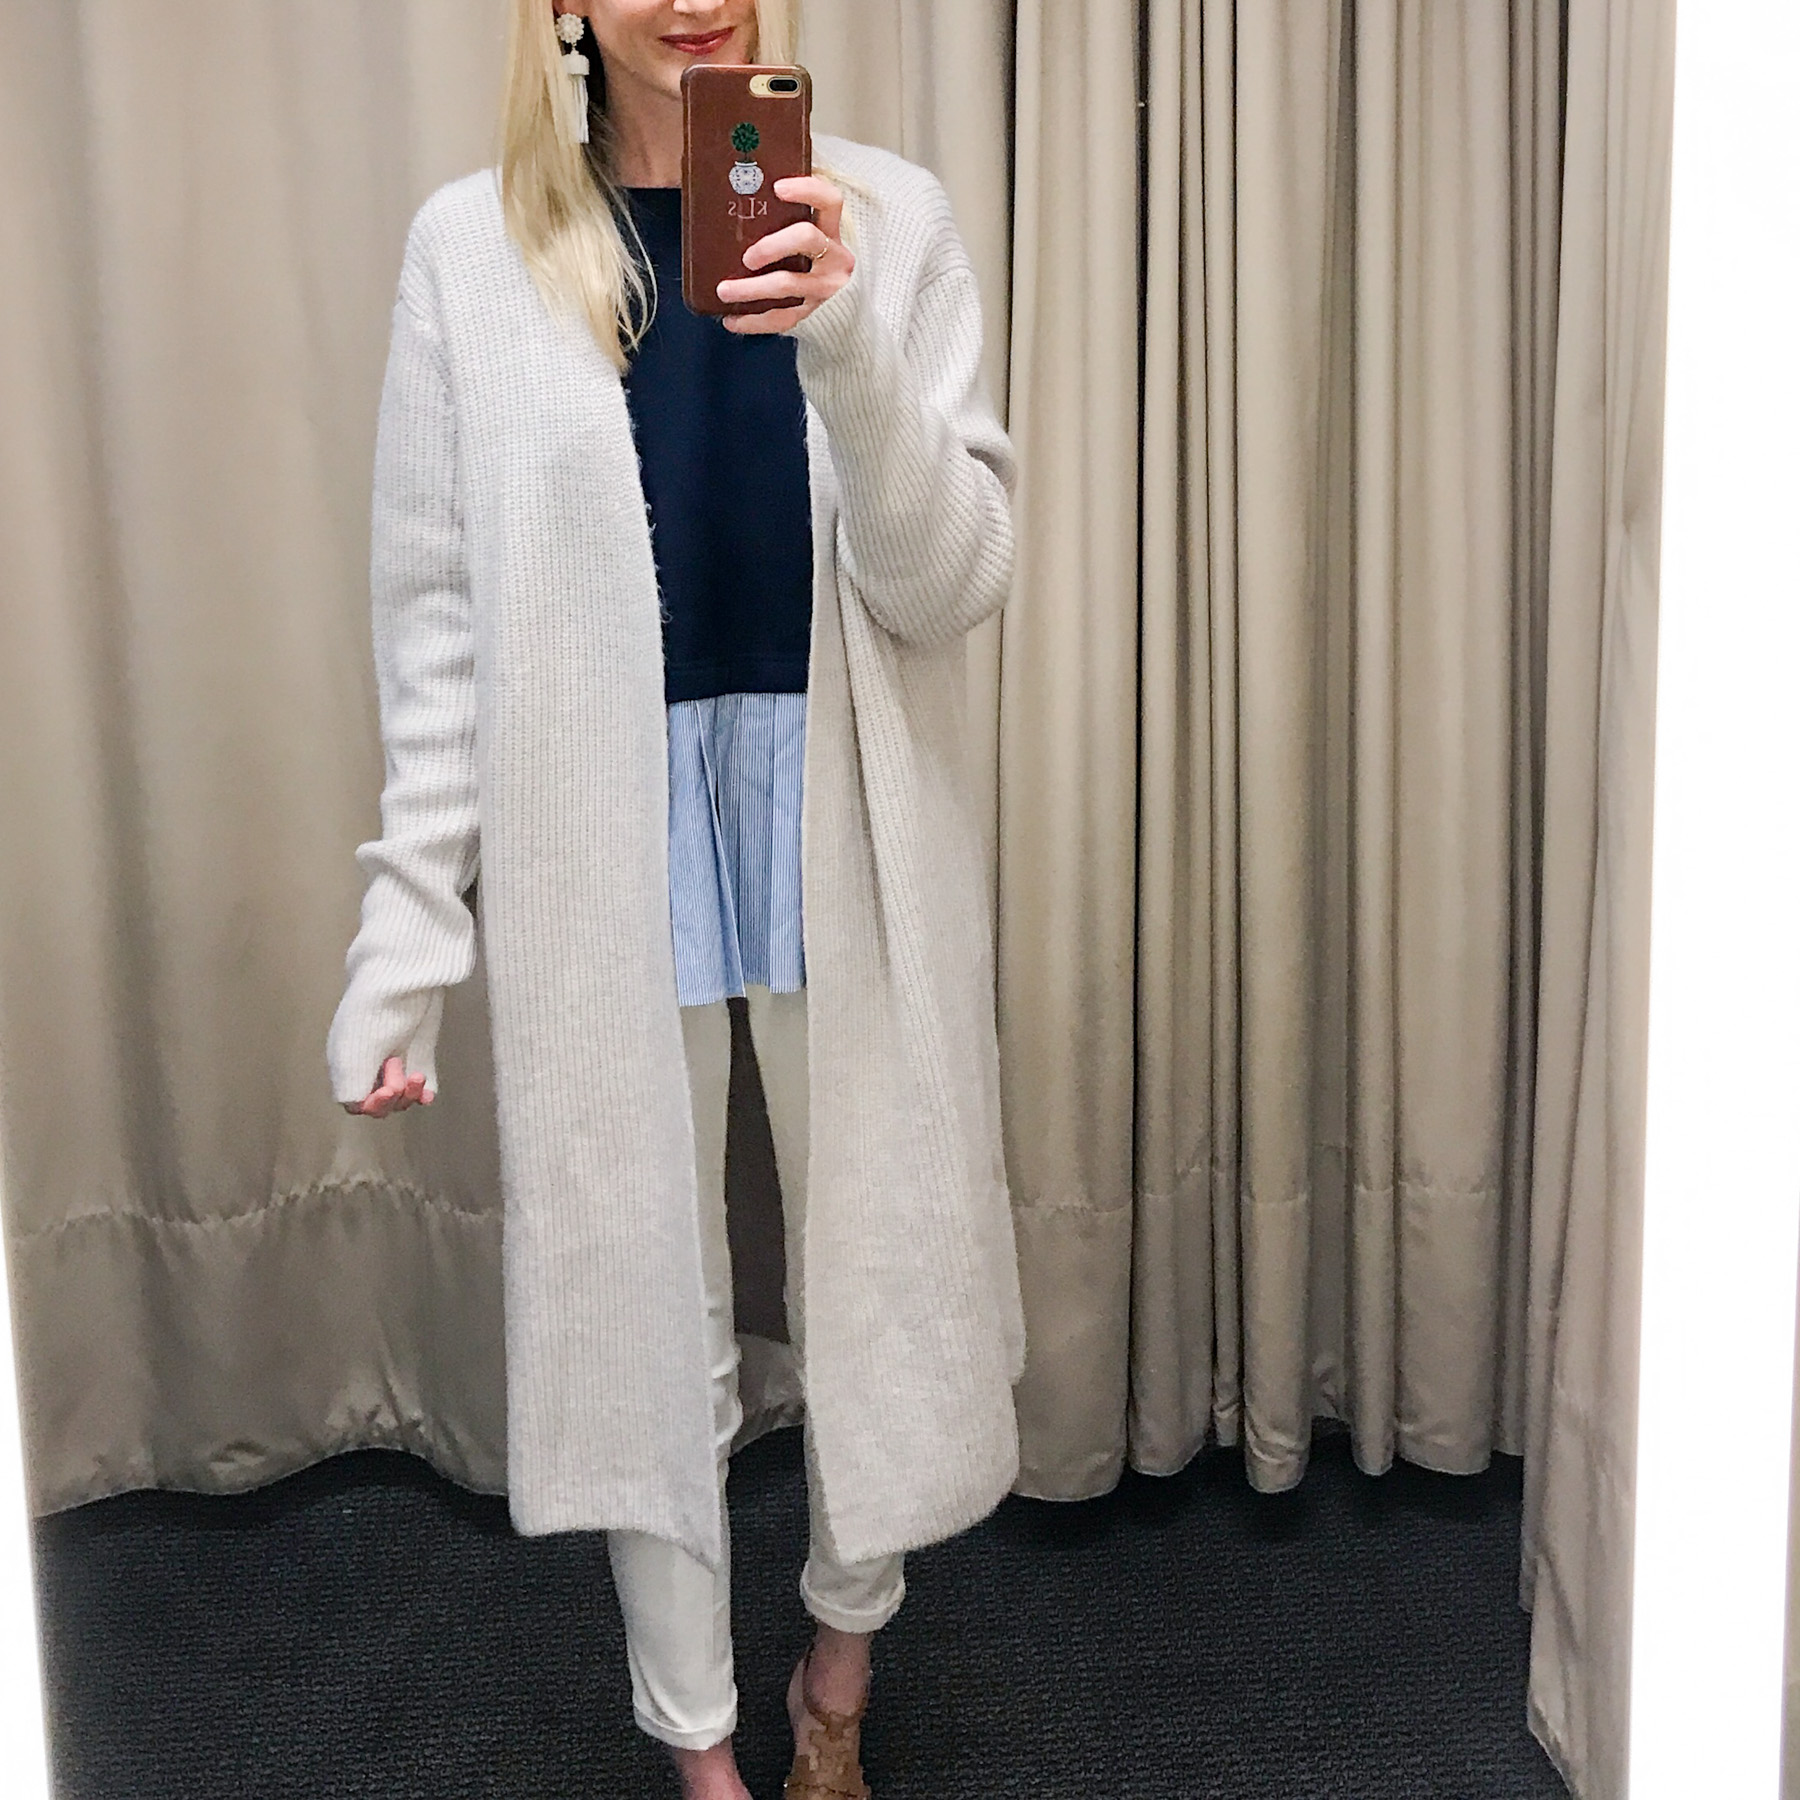 Long Cardigan / Pleated Top (On sale!) / Hudson White Skinny Jeans 